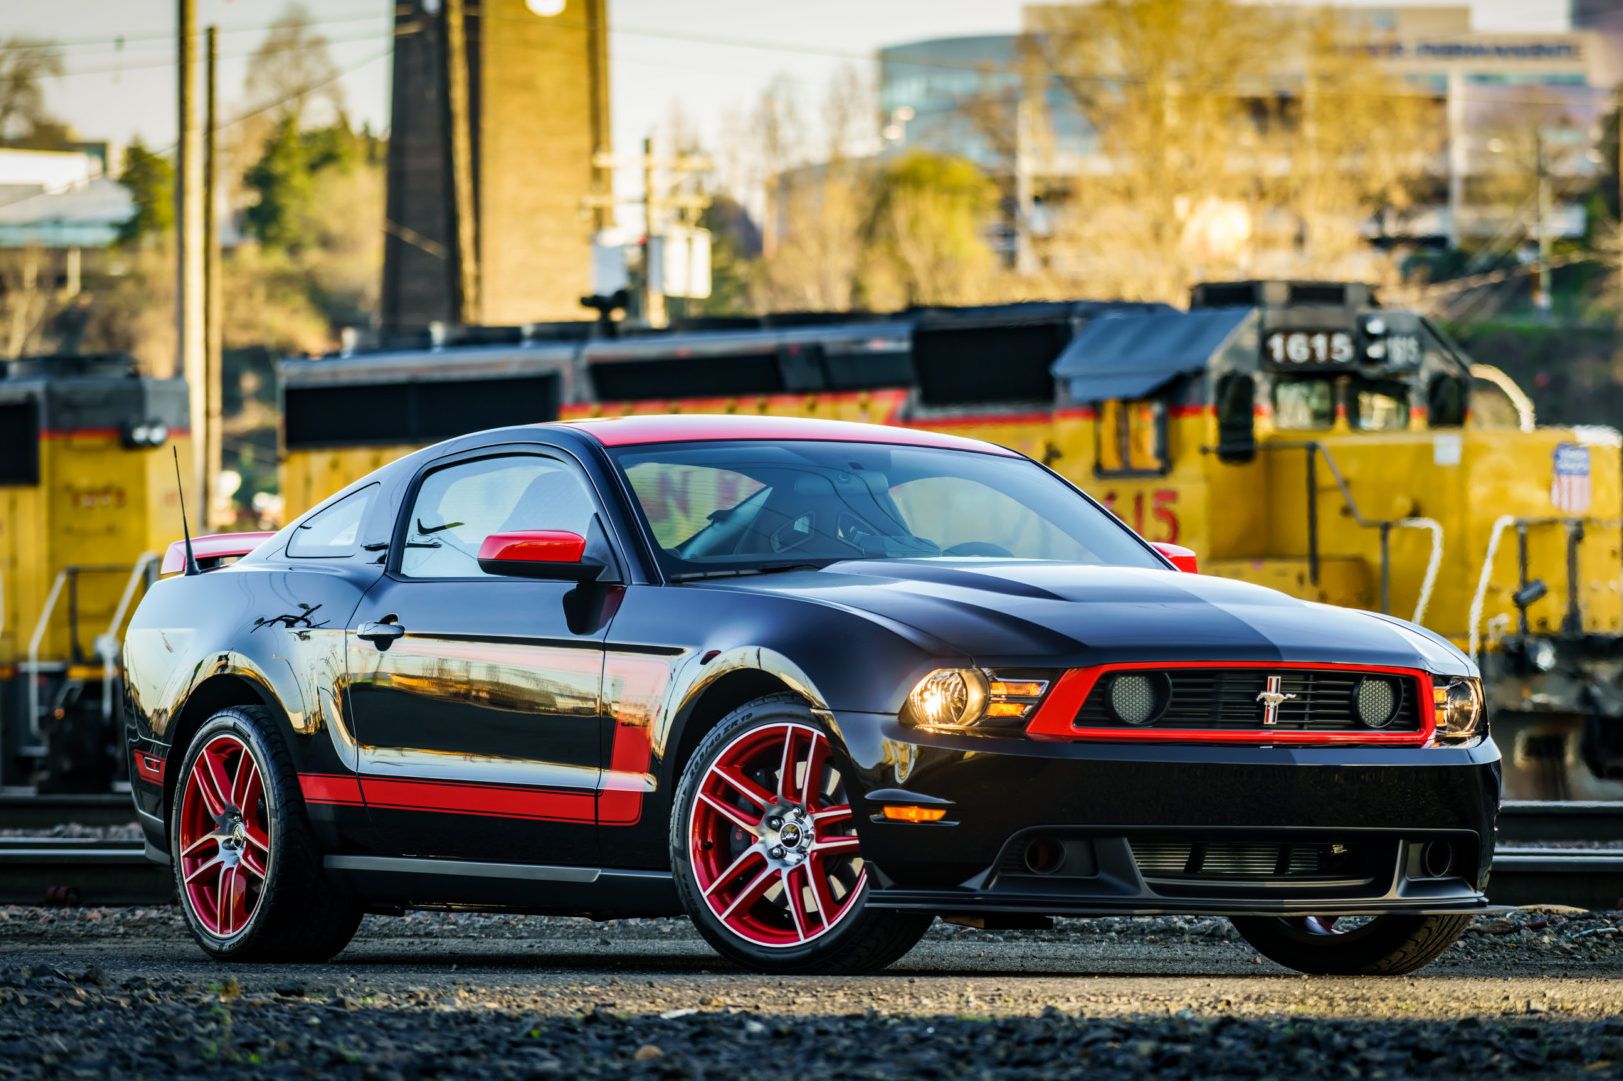 Black and Red 2012 Ford Mustang Boss 302 Laguna Seca in a train station